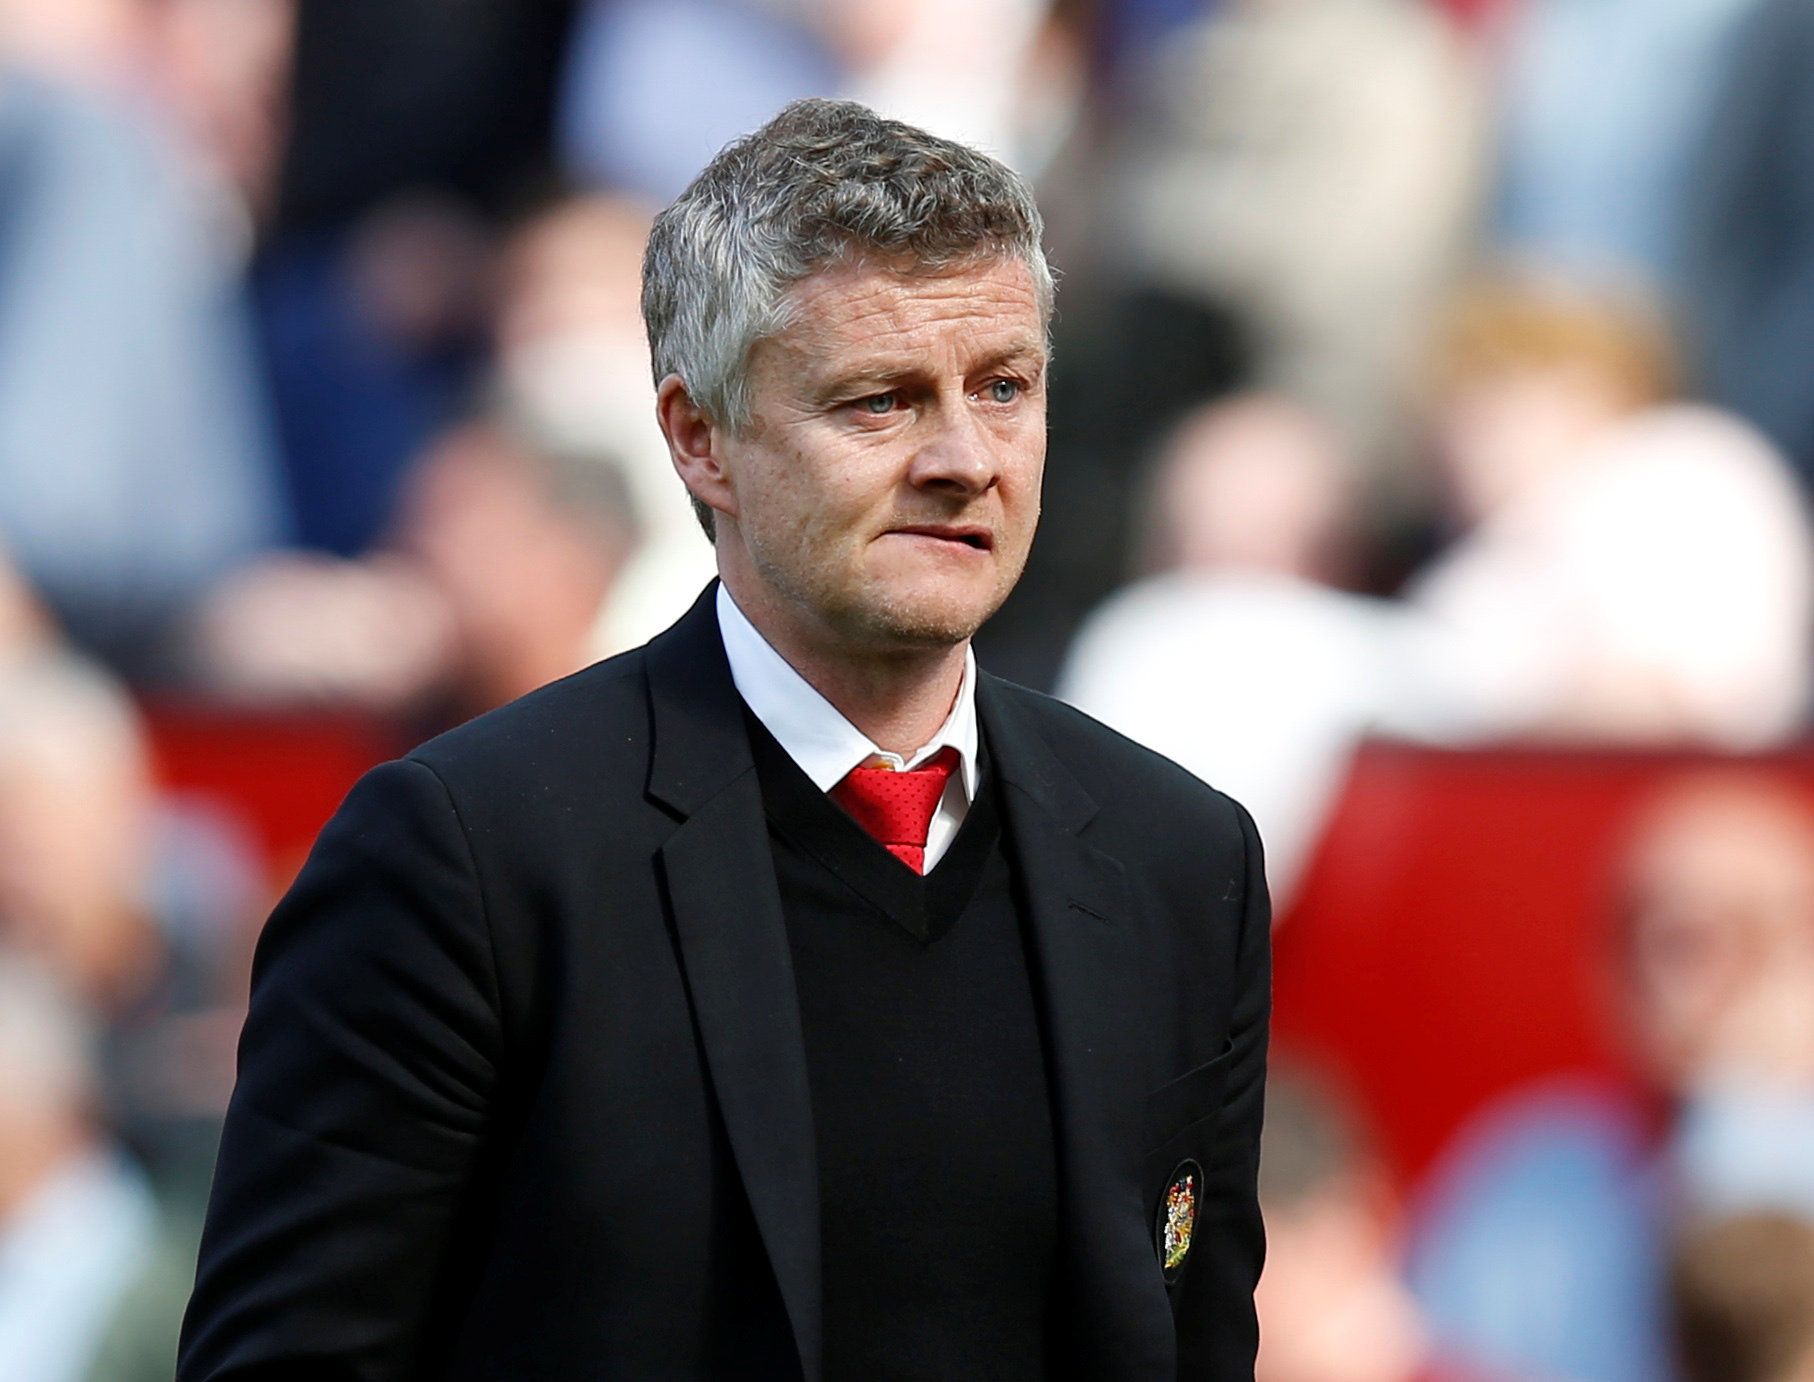 Soccer Football - Premier League - Manchester United v Cardiff City - Old Trafford, Manchester, Britain - May 12, 2019  Manchester United manager Ole Gunnar Solskjaer reacts during the match      REUTERS/Andrew Yates  EDITORIAL USE ONLY. No use with unauthorized audio, video, data, fixture lists, club/league logos or 